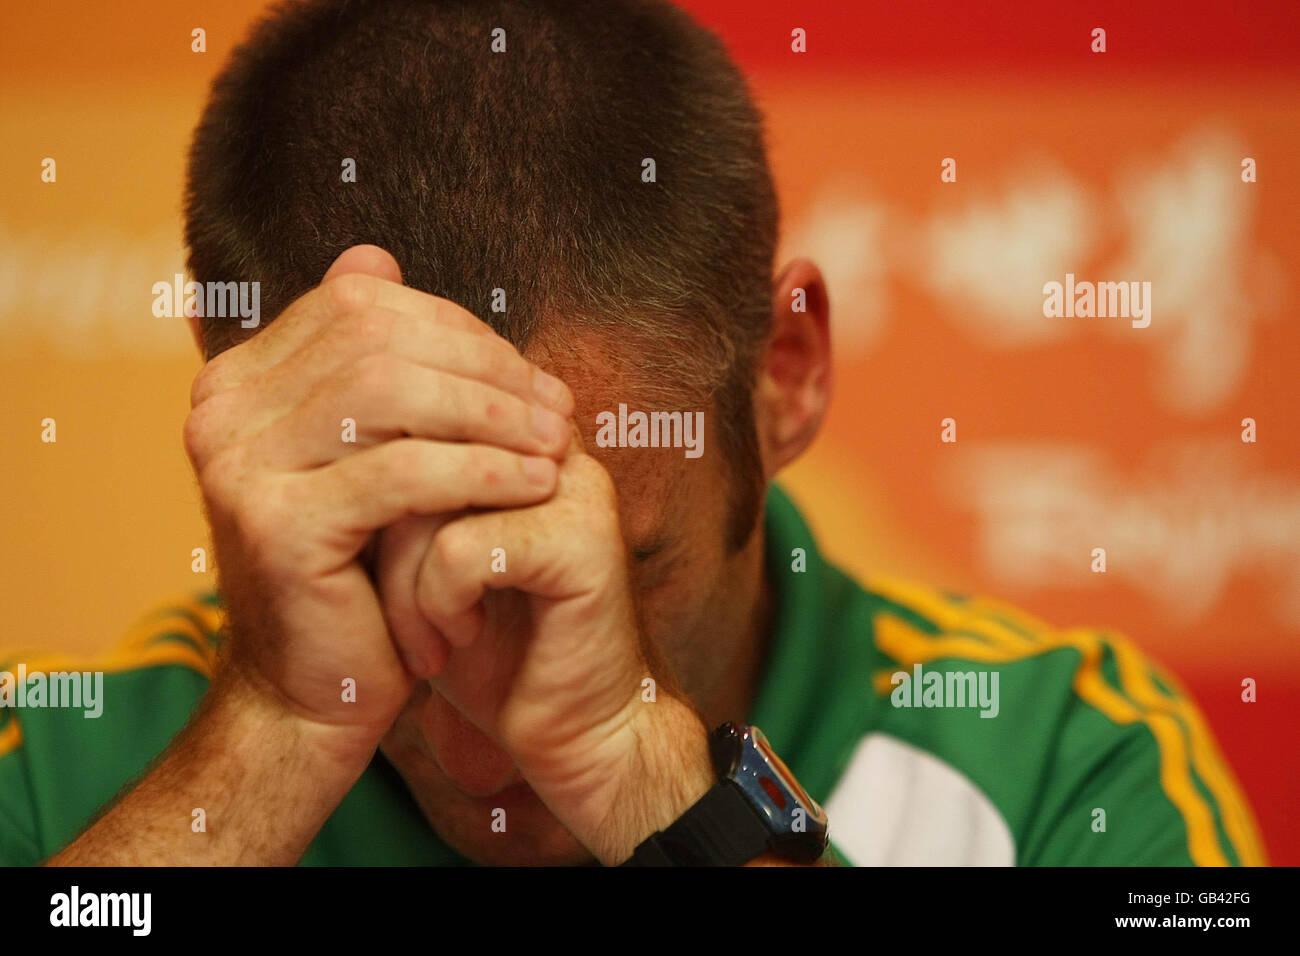 Republic of Ireland's Derek Malone during a press conference at the International Press Centre during the Beijing Paralympic Games 2008, China. Stock Photo